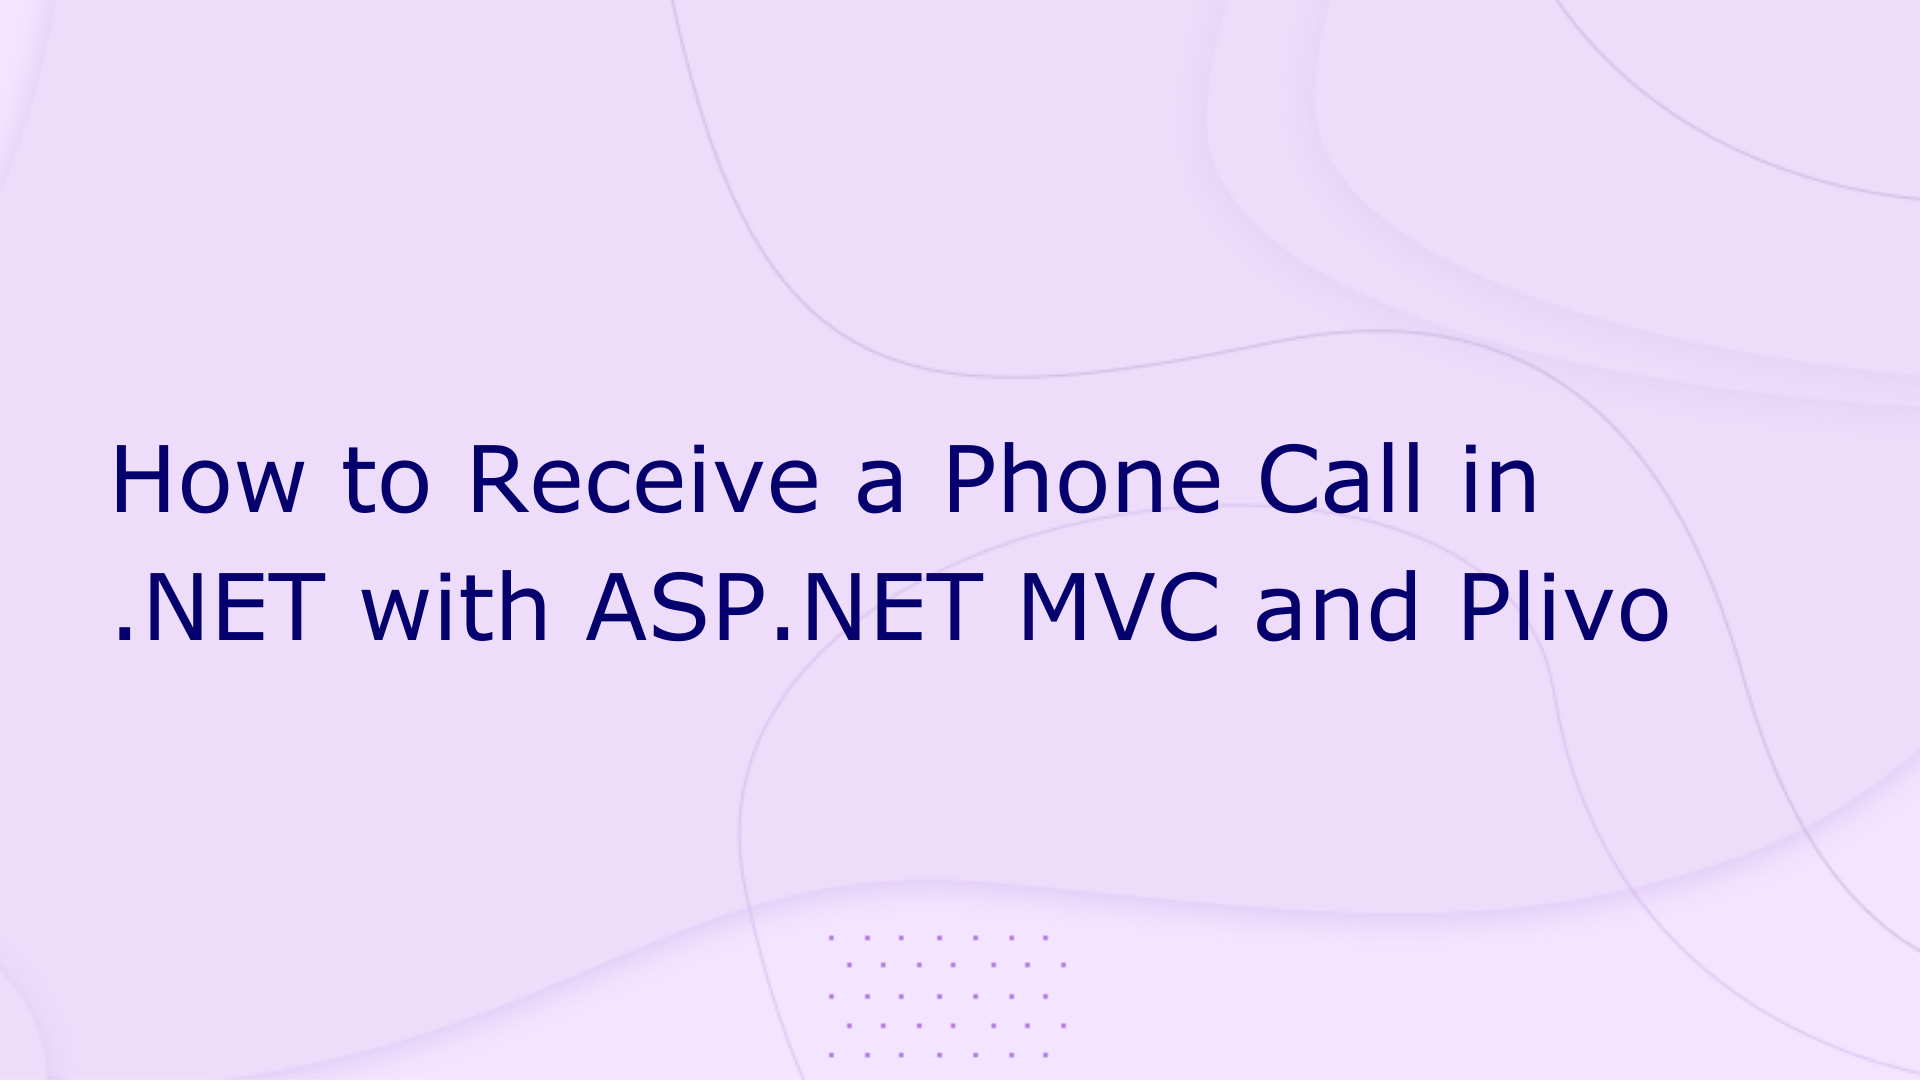 How to Receive a Phone Call in .NET with ASP.NET MVC and Plivo